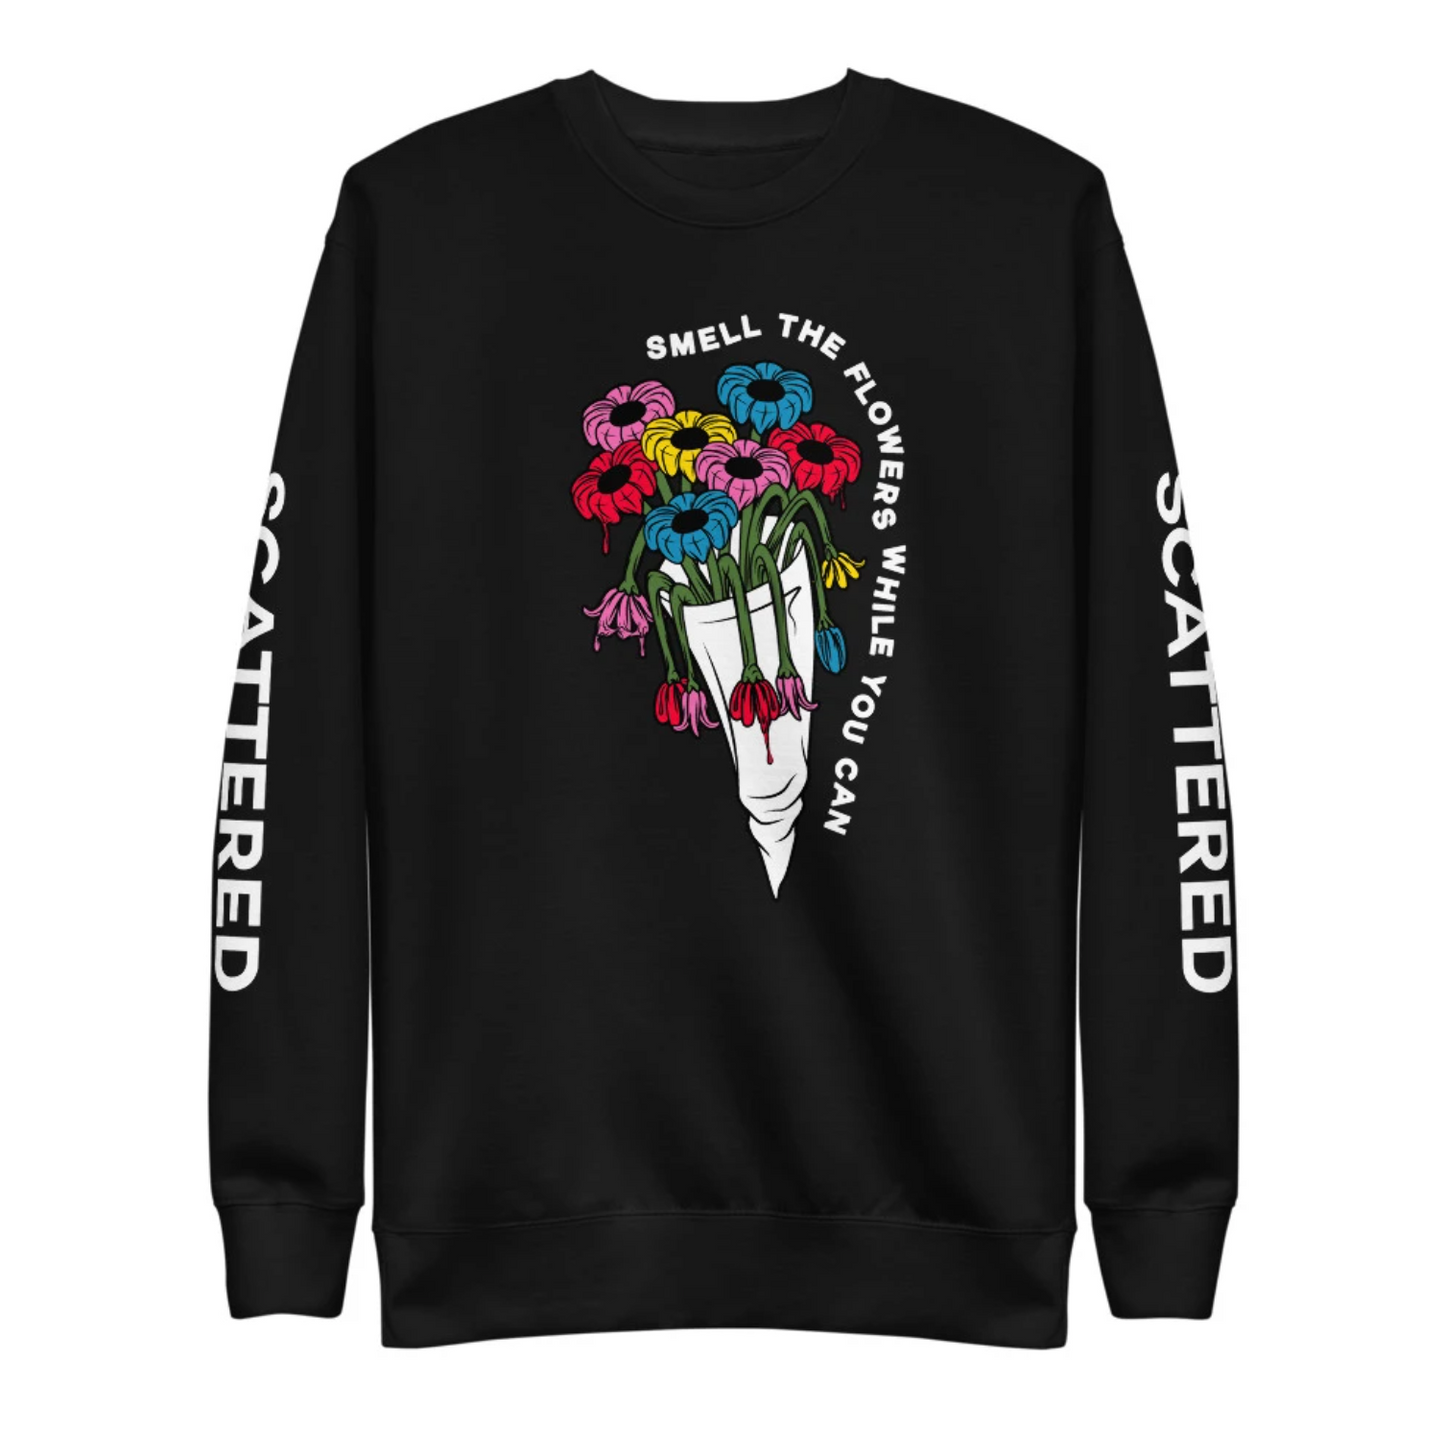 Smell The Flowers Graphic Print Black French Terry Sweatshirt Printed Sleeves | Mens Clothing Streetwear Scattered Dripped Gawd Dizzuane Crewneck